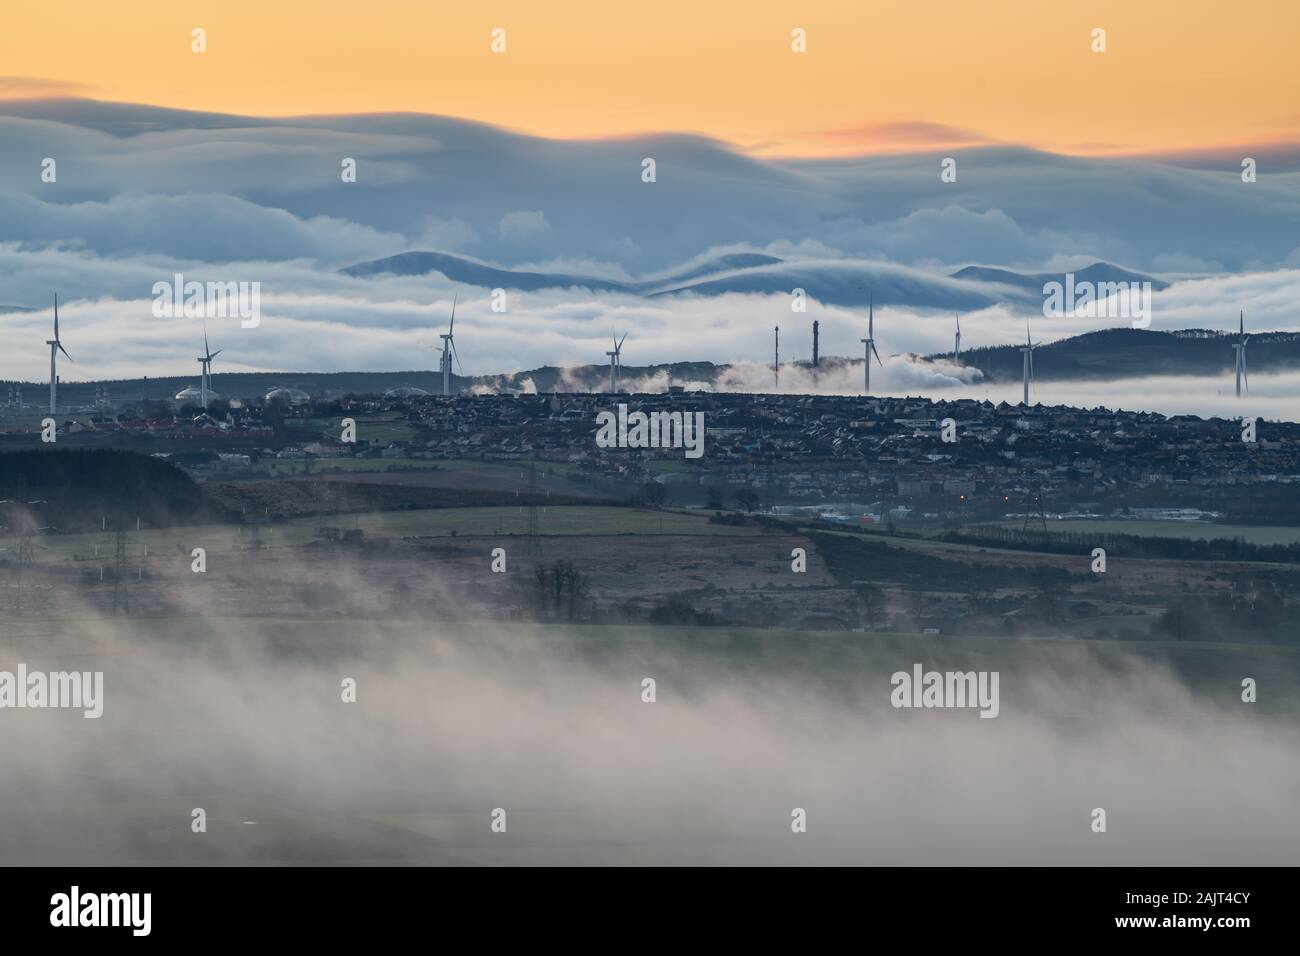 Wind farm, petrochemical plant and small town with Pentland Hills and rolling mist in the background. Stock Photo